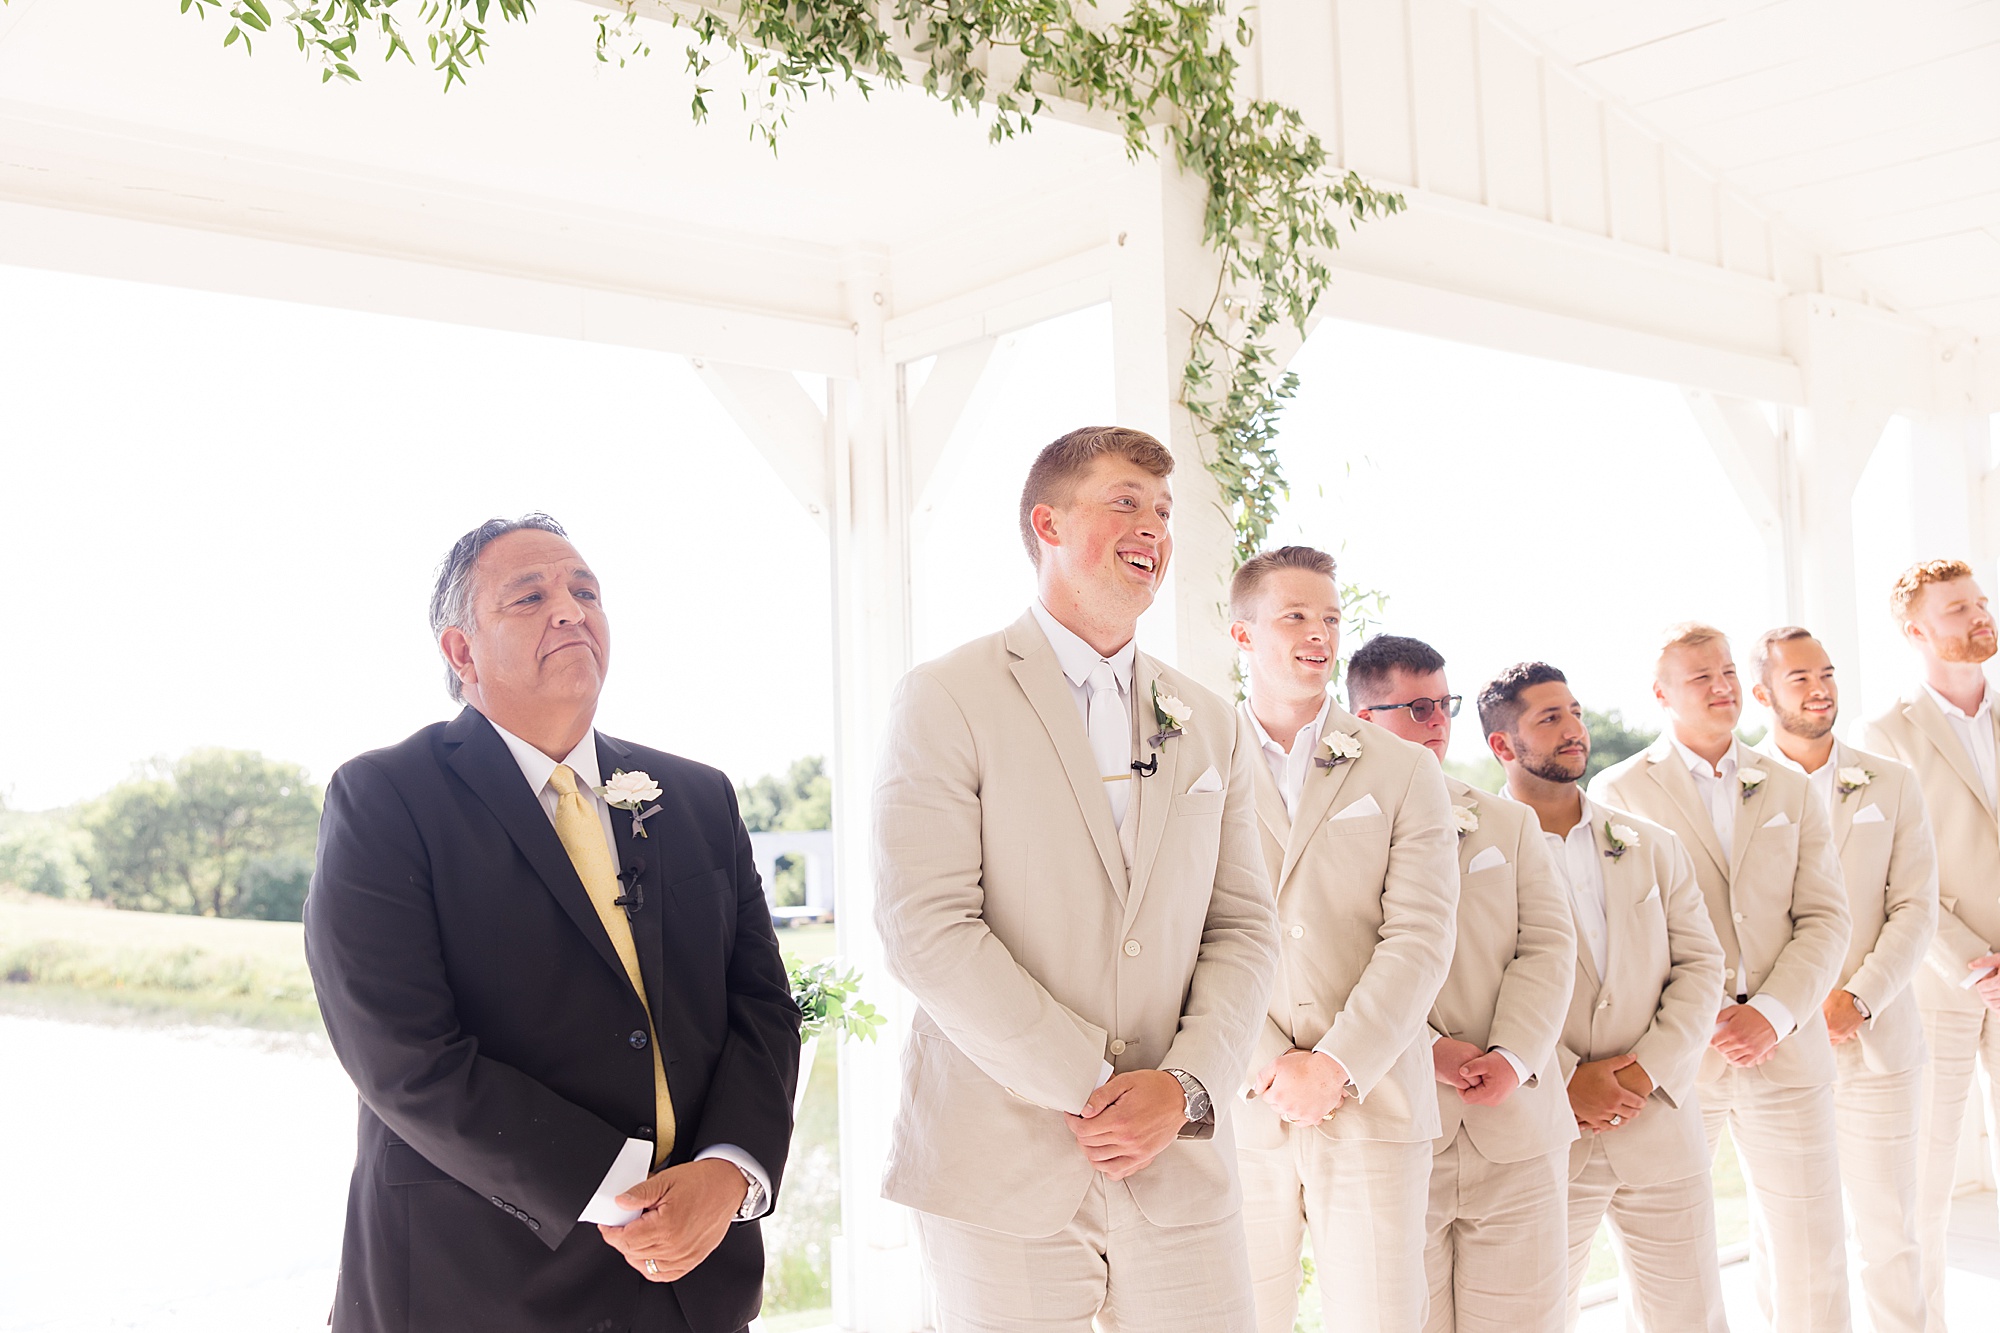 groom watches bride walk down aisle during Texas wedding ceremony